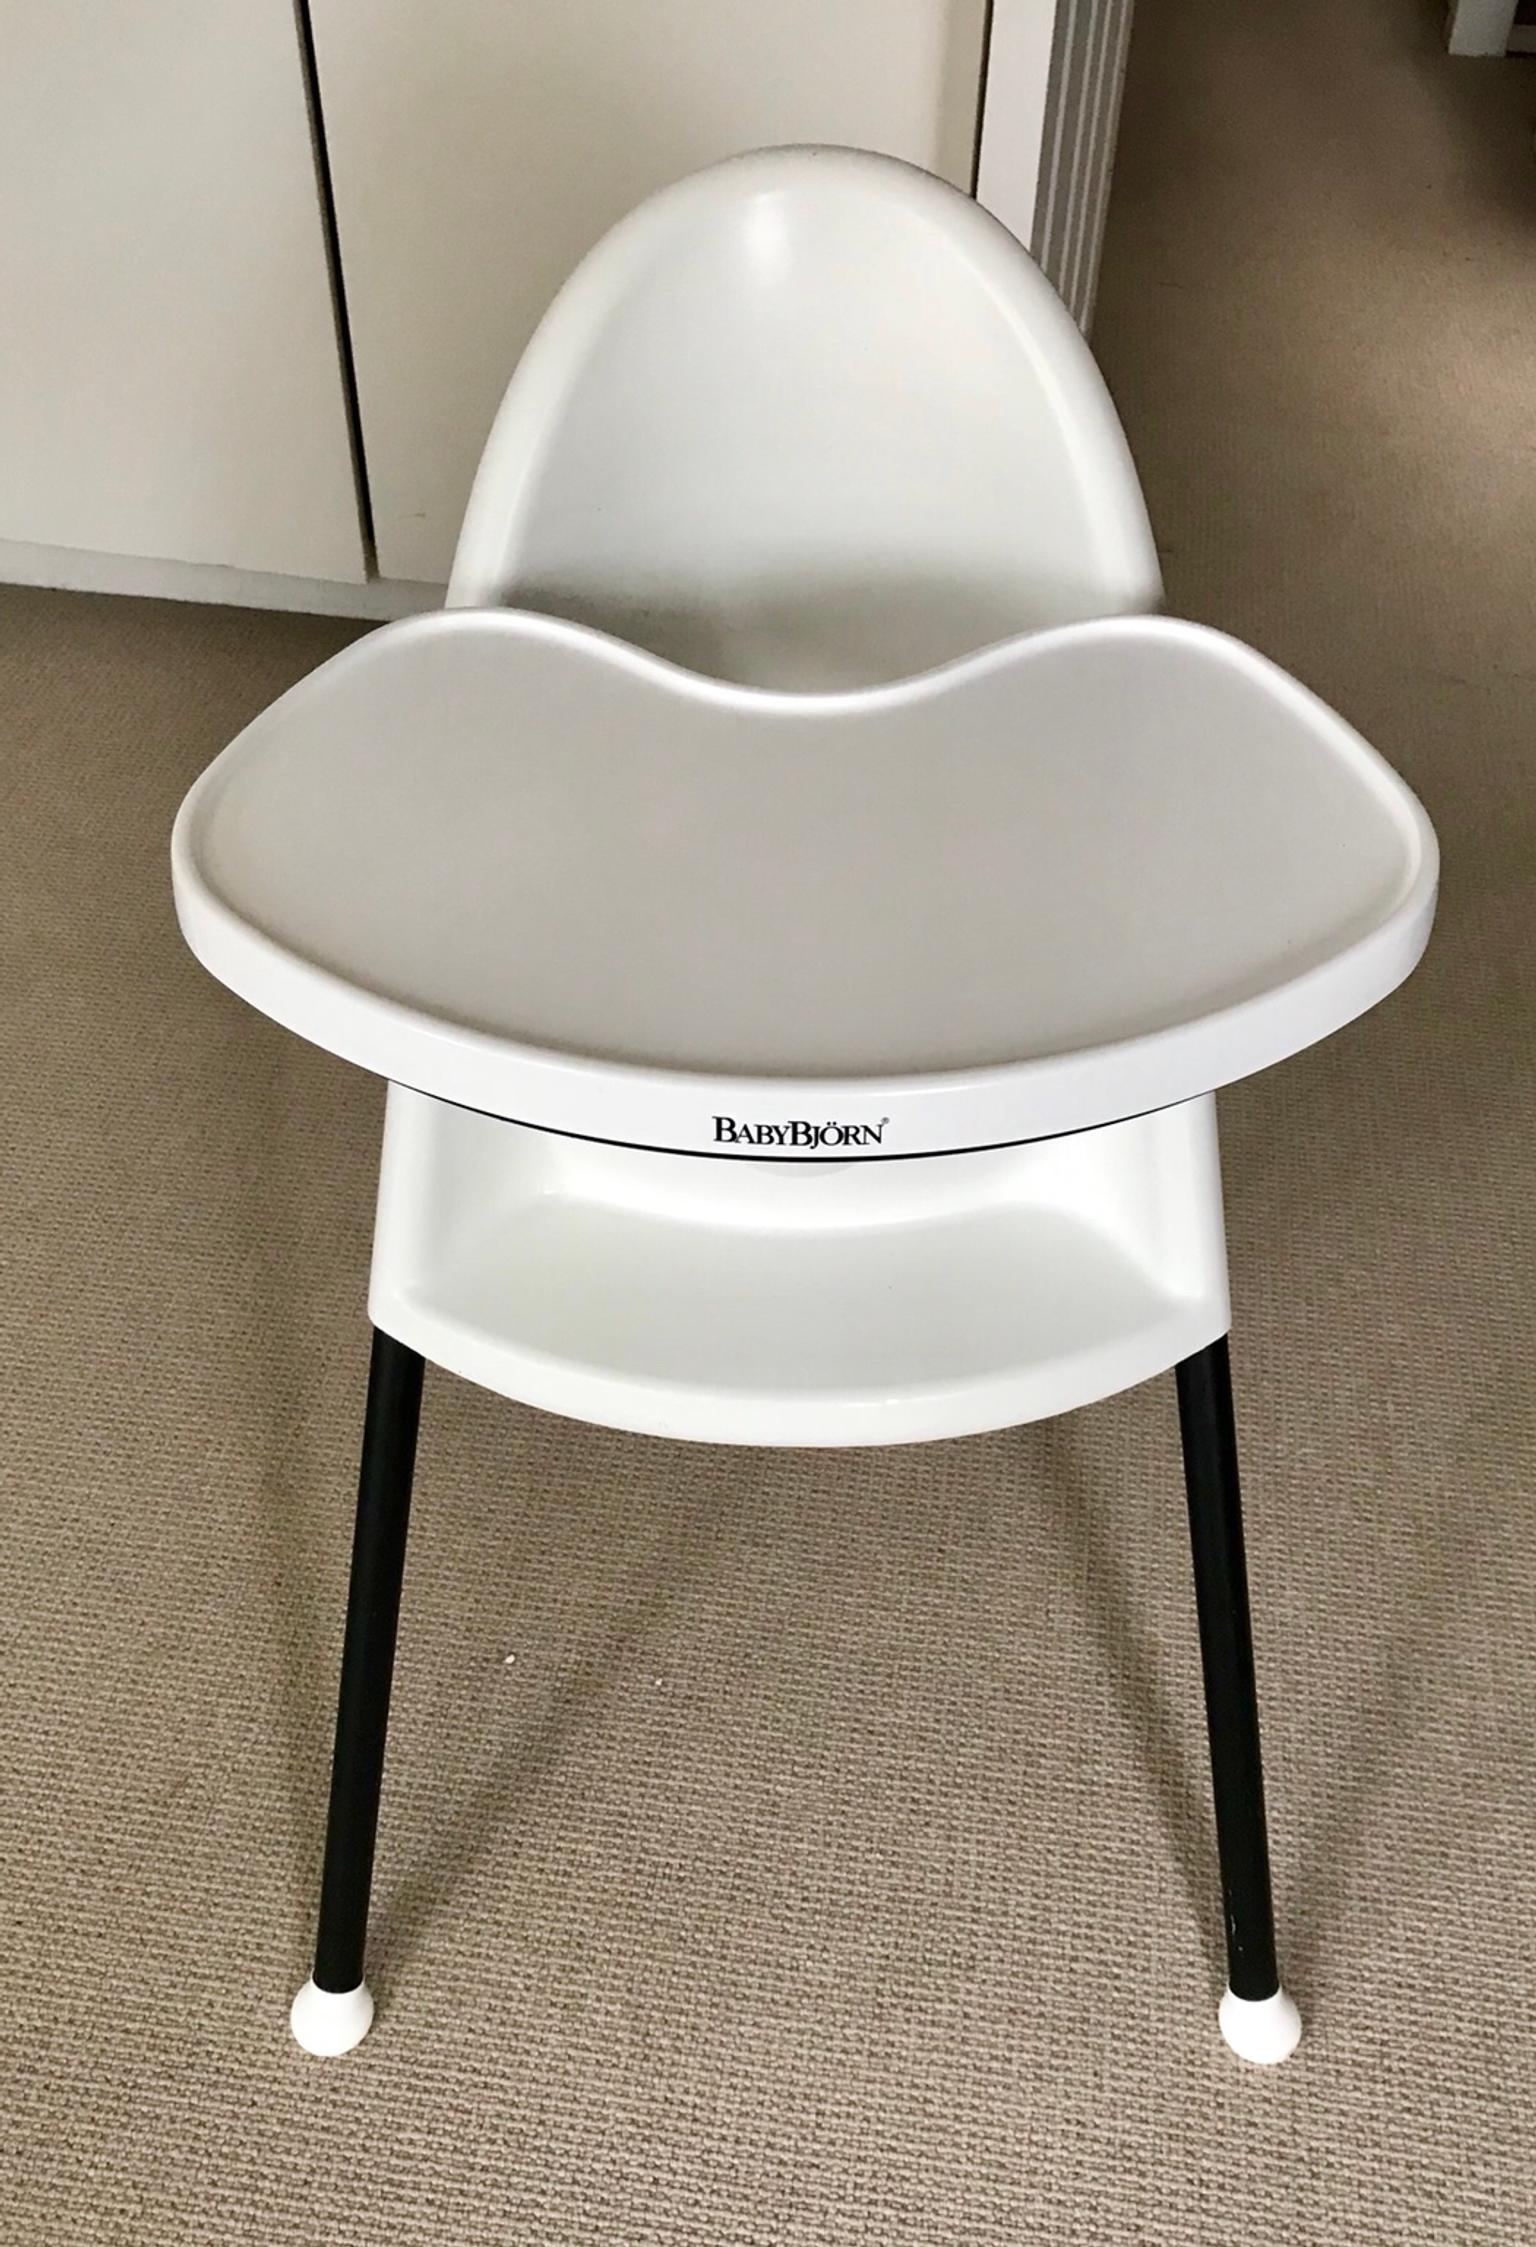 Baby Bjorn High Chair In Tw1 Thames For 75 00 For Sale Shpock